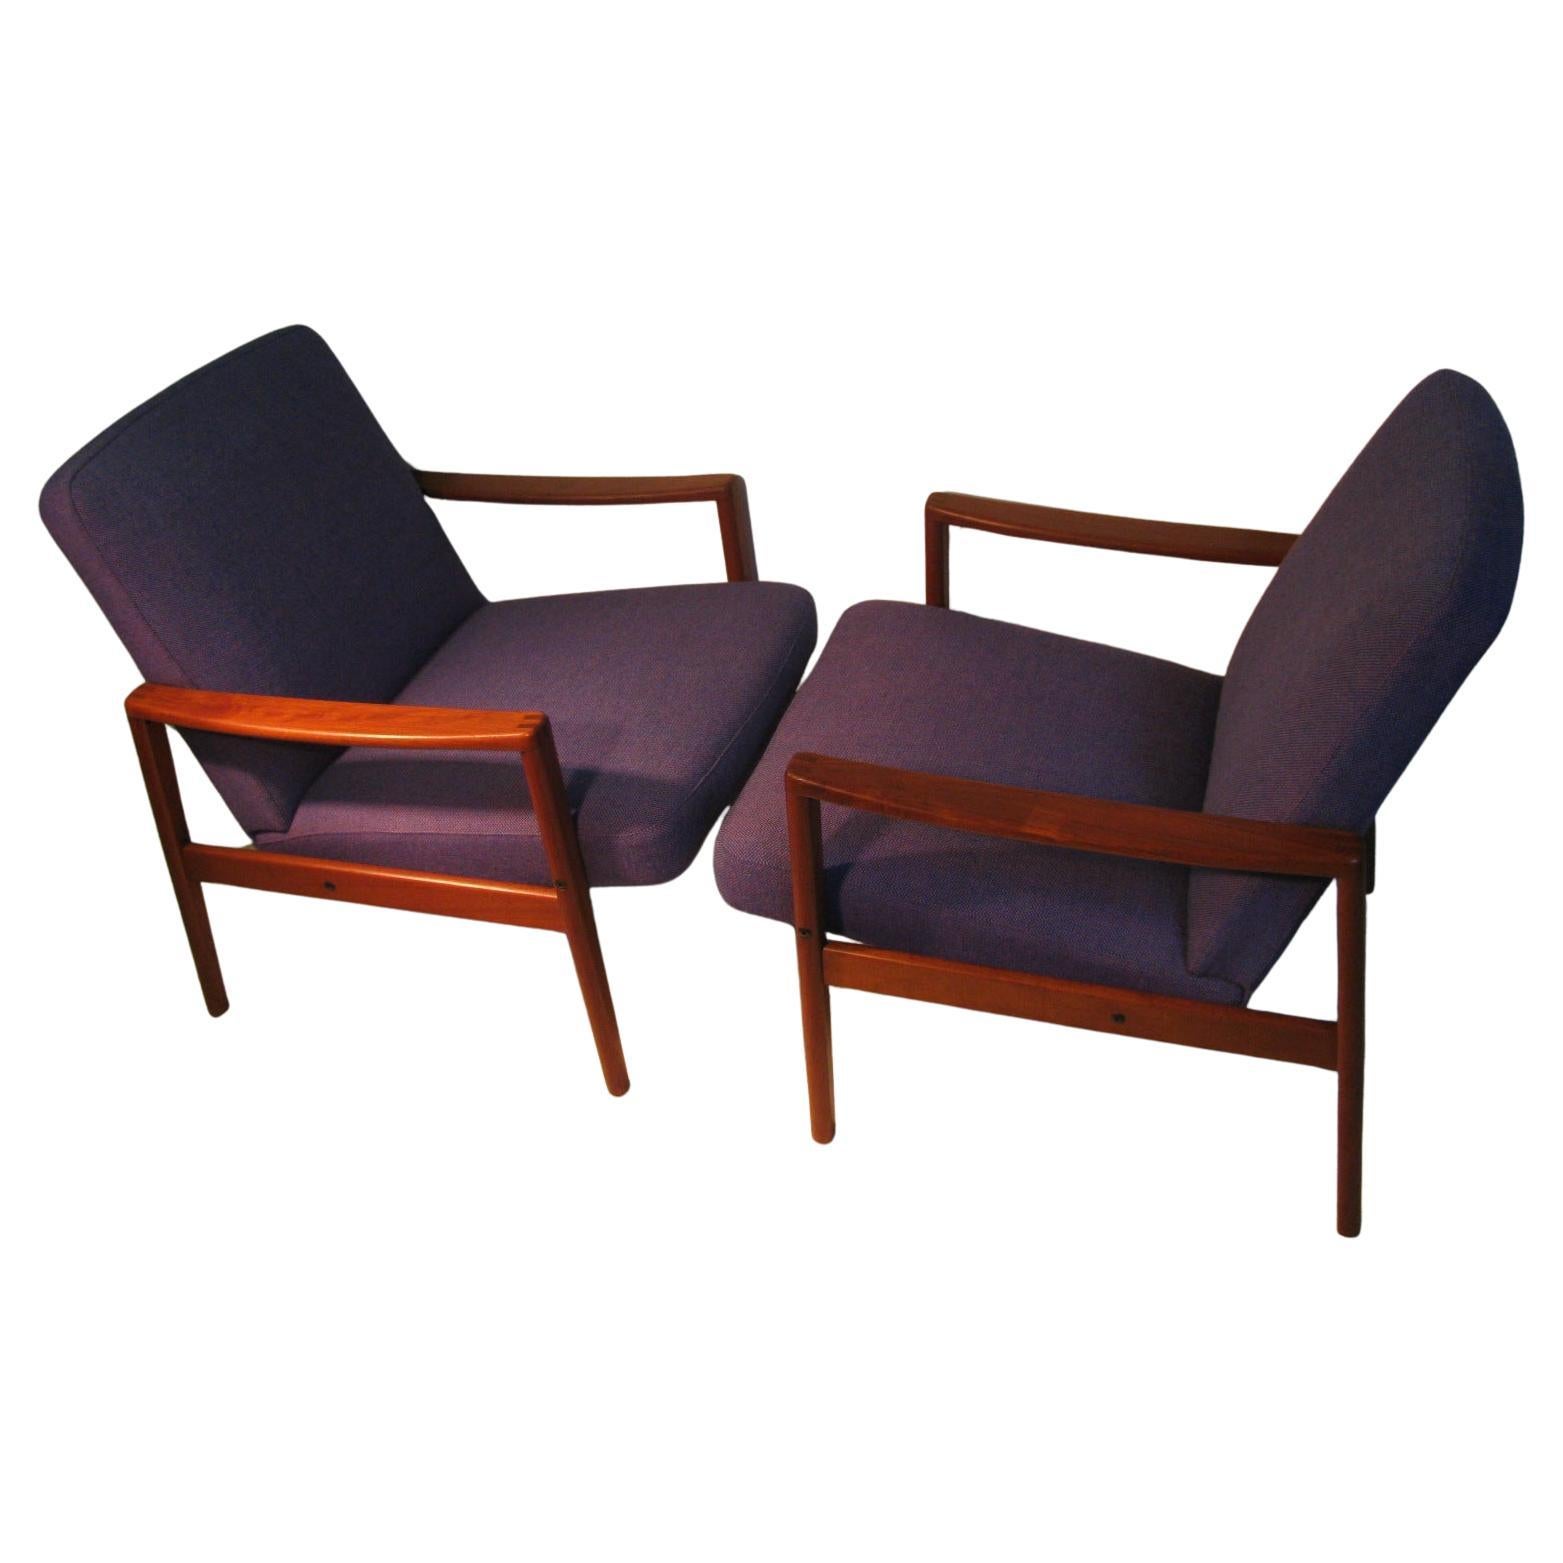 Hand-Crafted Pair of Mid Century Scandinavian Modern Lounge Chairs Ulferts Sweden For Sale